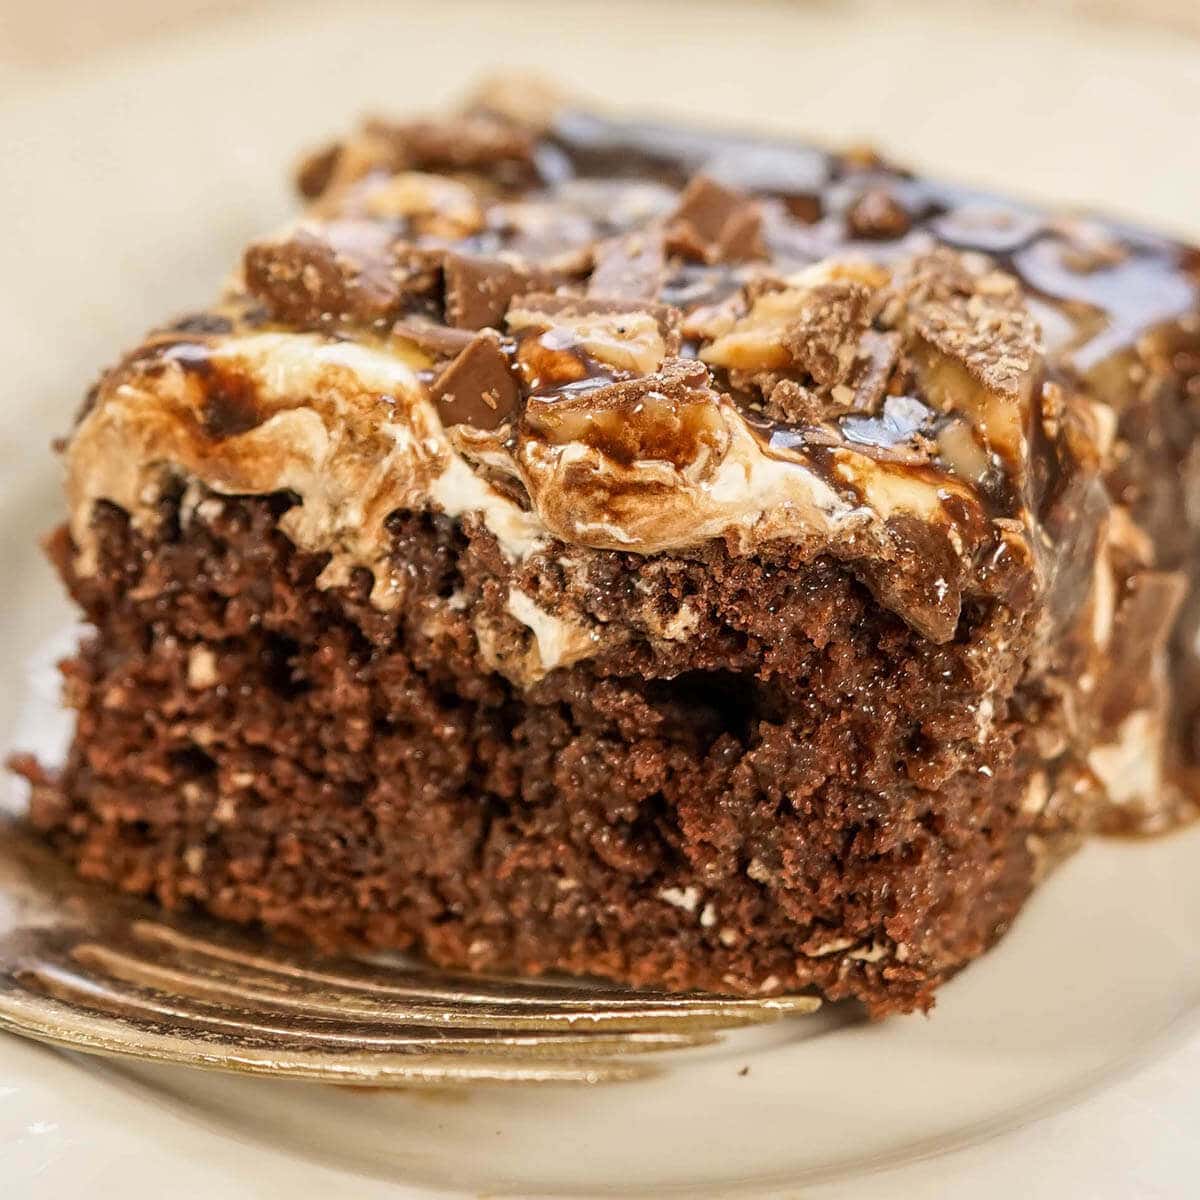 Chocolate cake with whipped cream frosting, topped with crunched up chocolate bars on plate with fork.